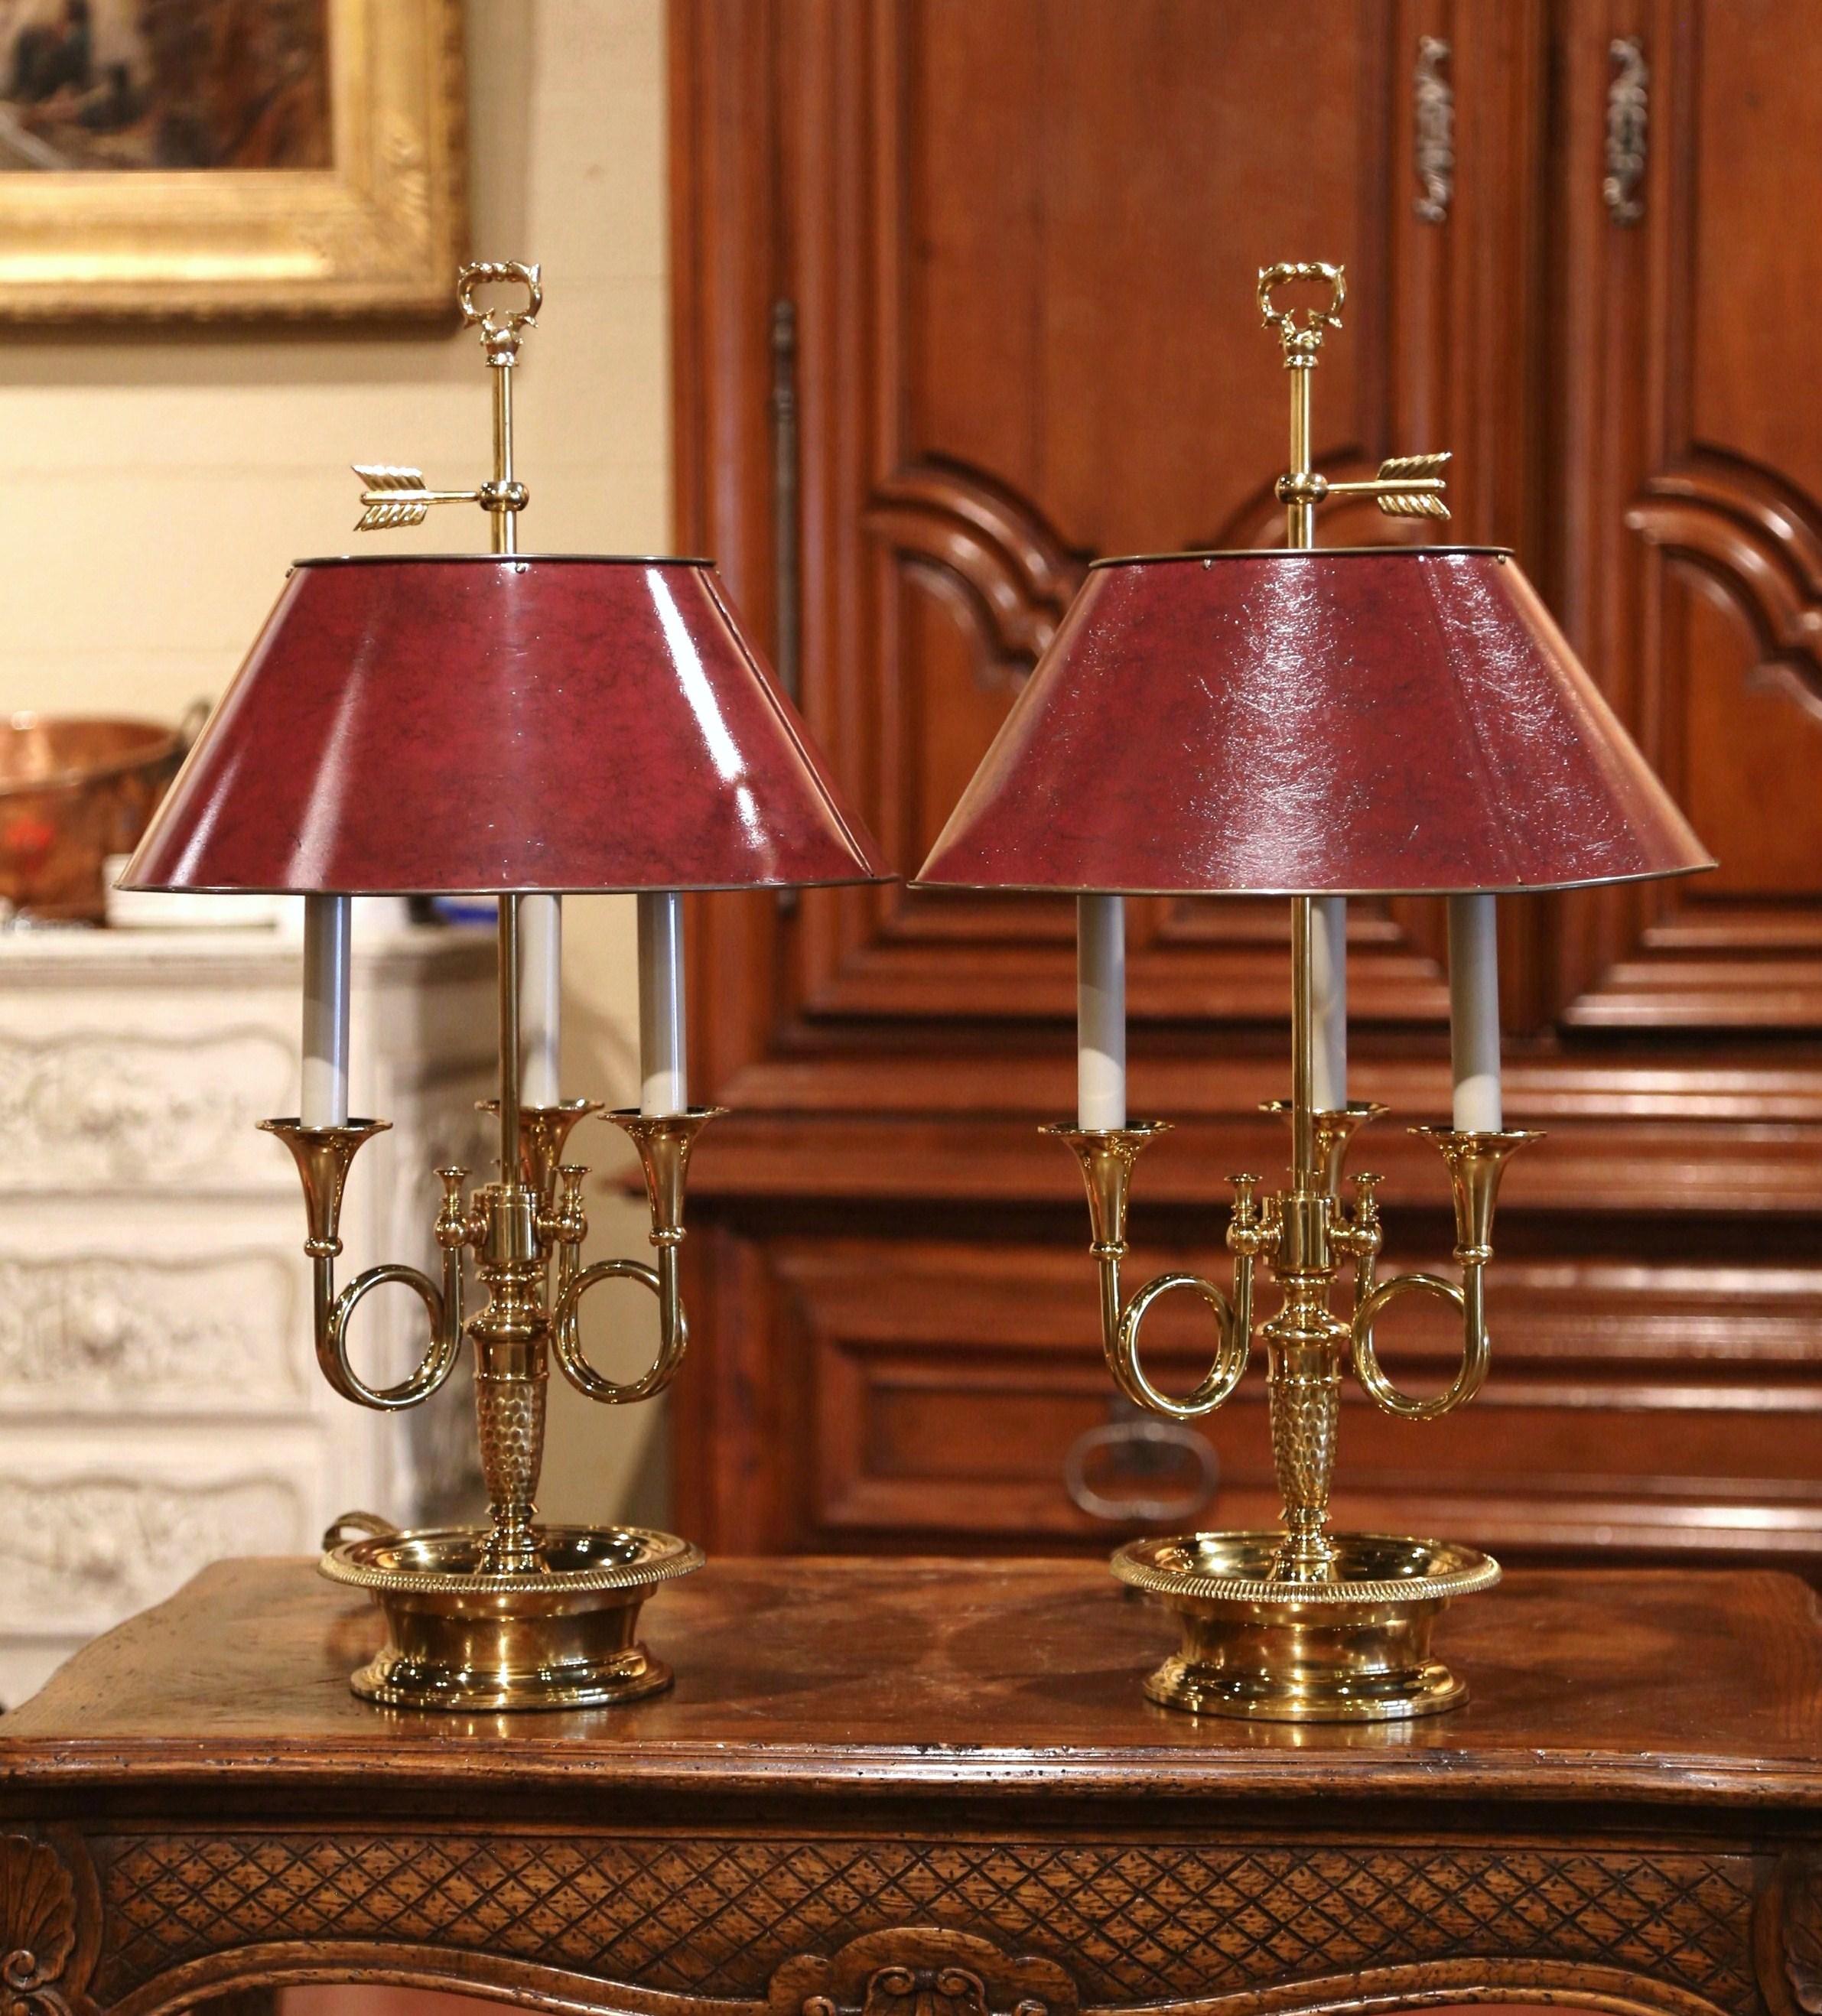 Hand-Crafted Pair of French Polished Brass Three-Light Table Lamps with Red Tole Shades